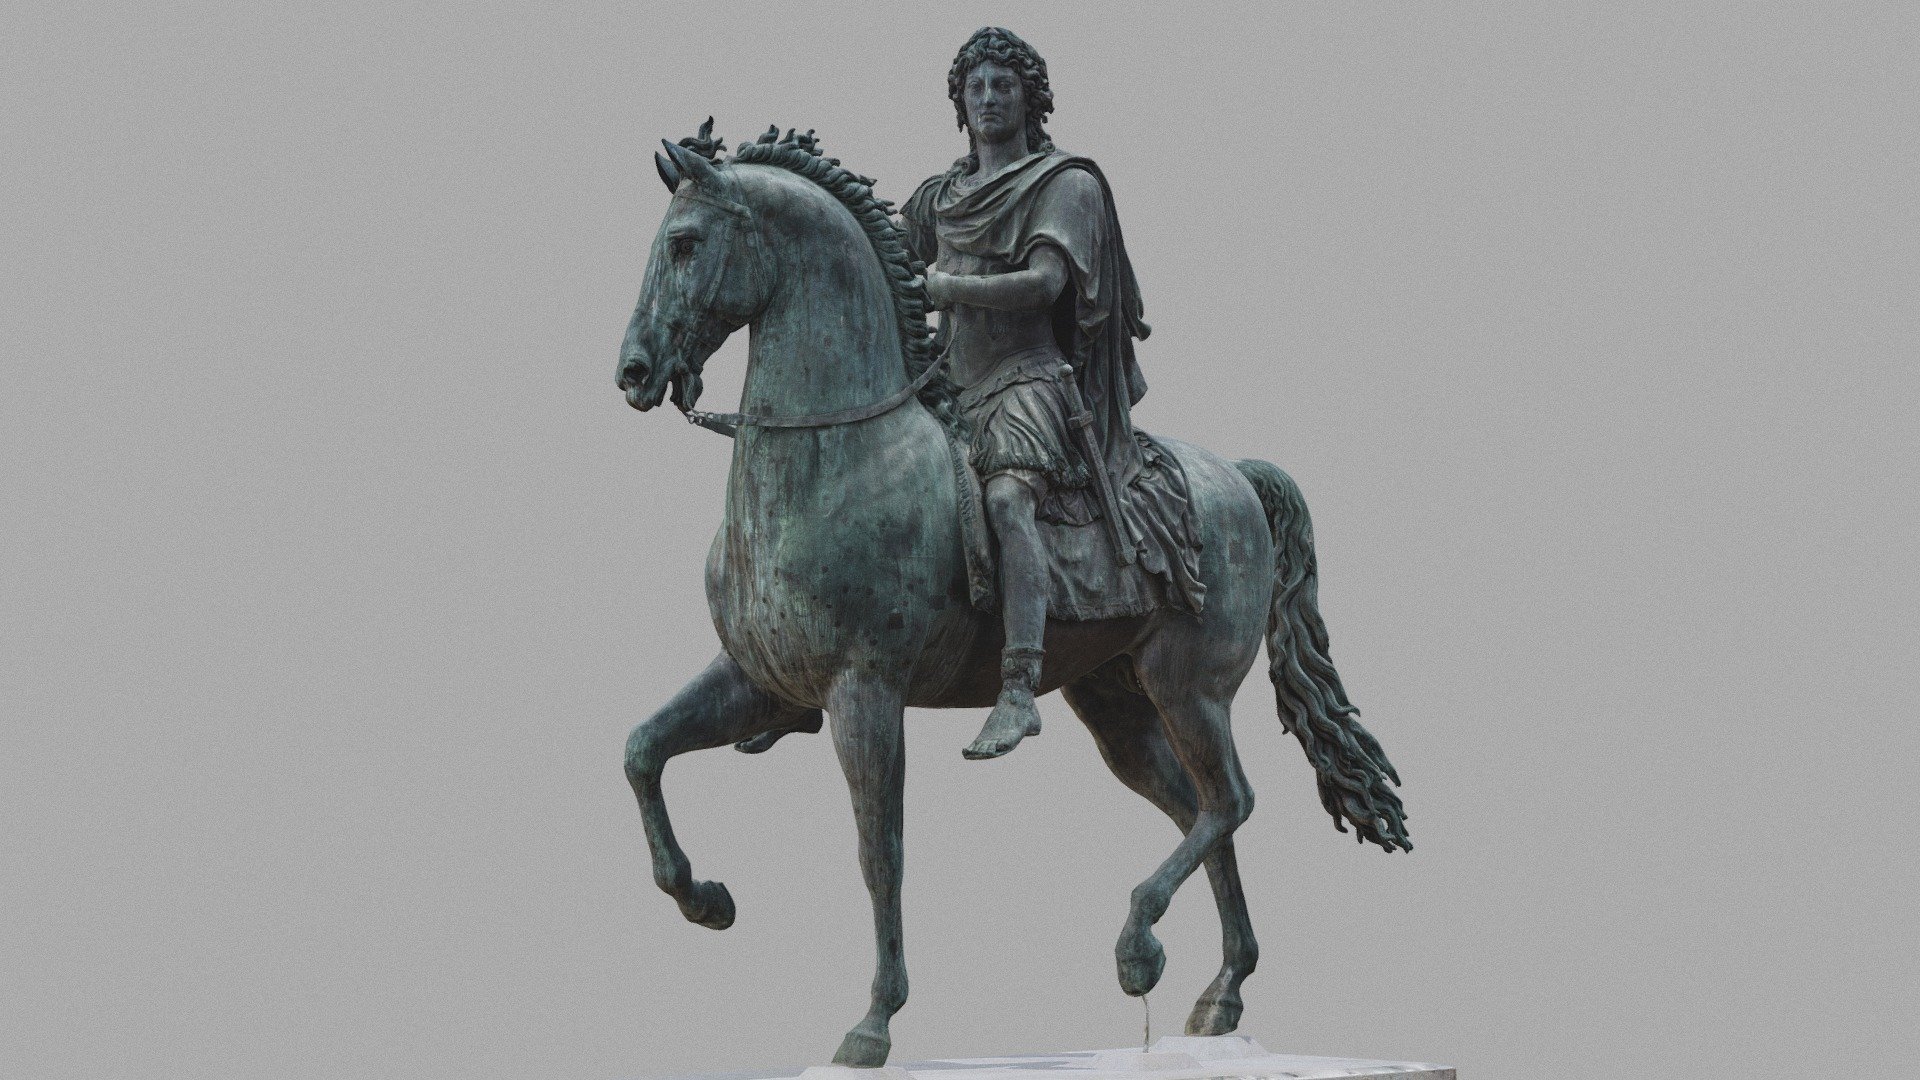 This statue is located on &ldquo;Place Bellecour